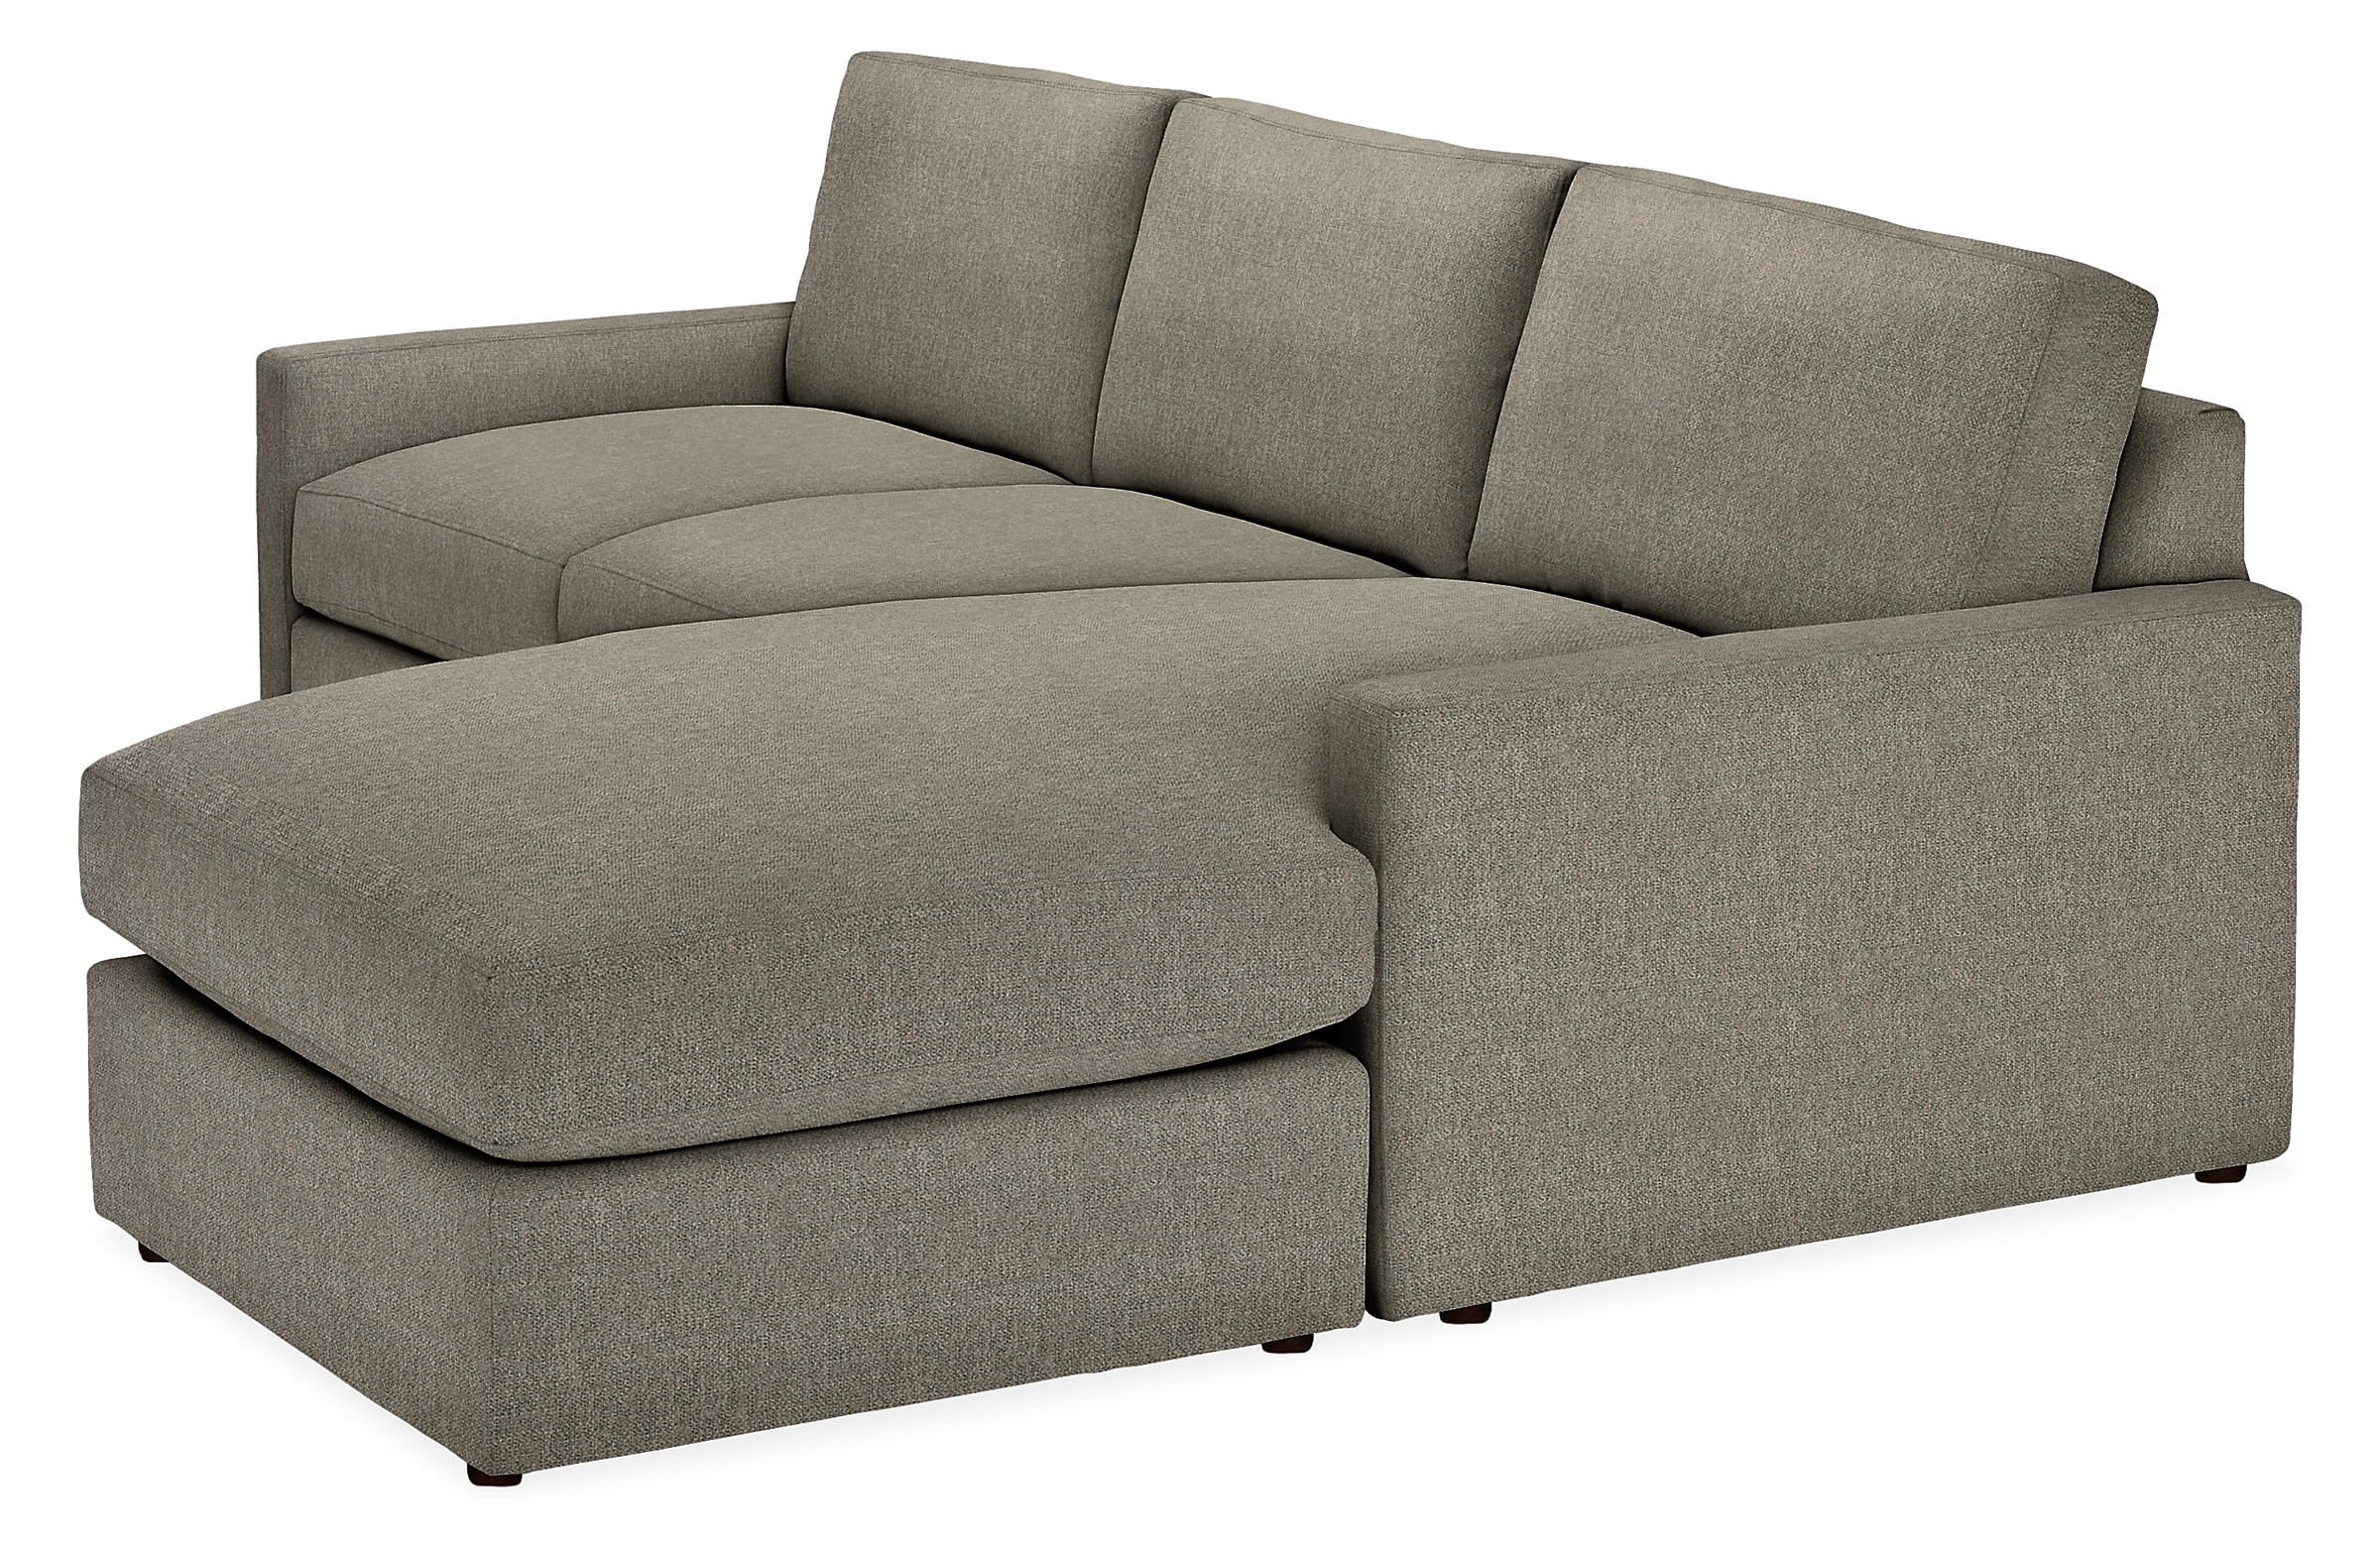 Detail of Linger 91 Sofa with Reversible Chaise in Tepic Fabric.